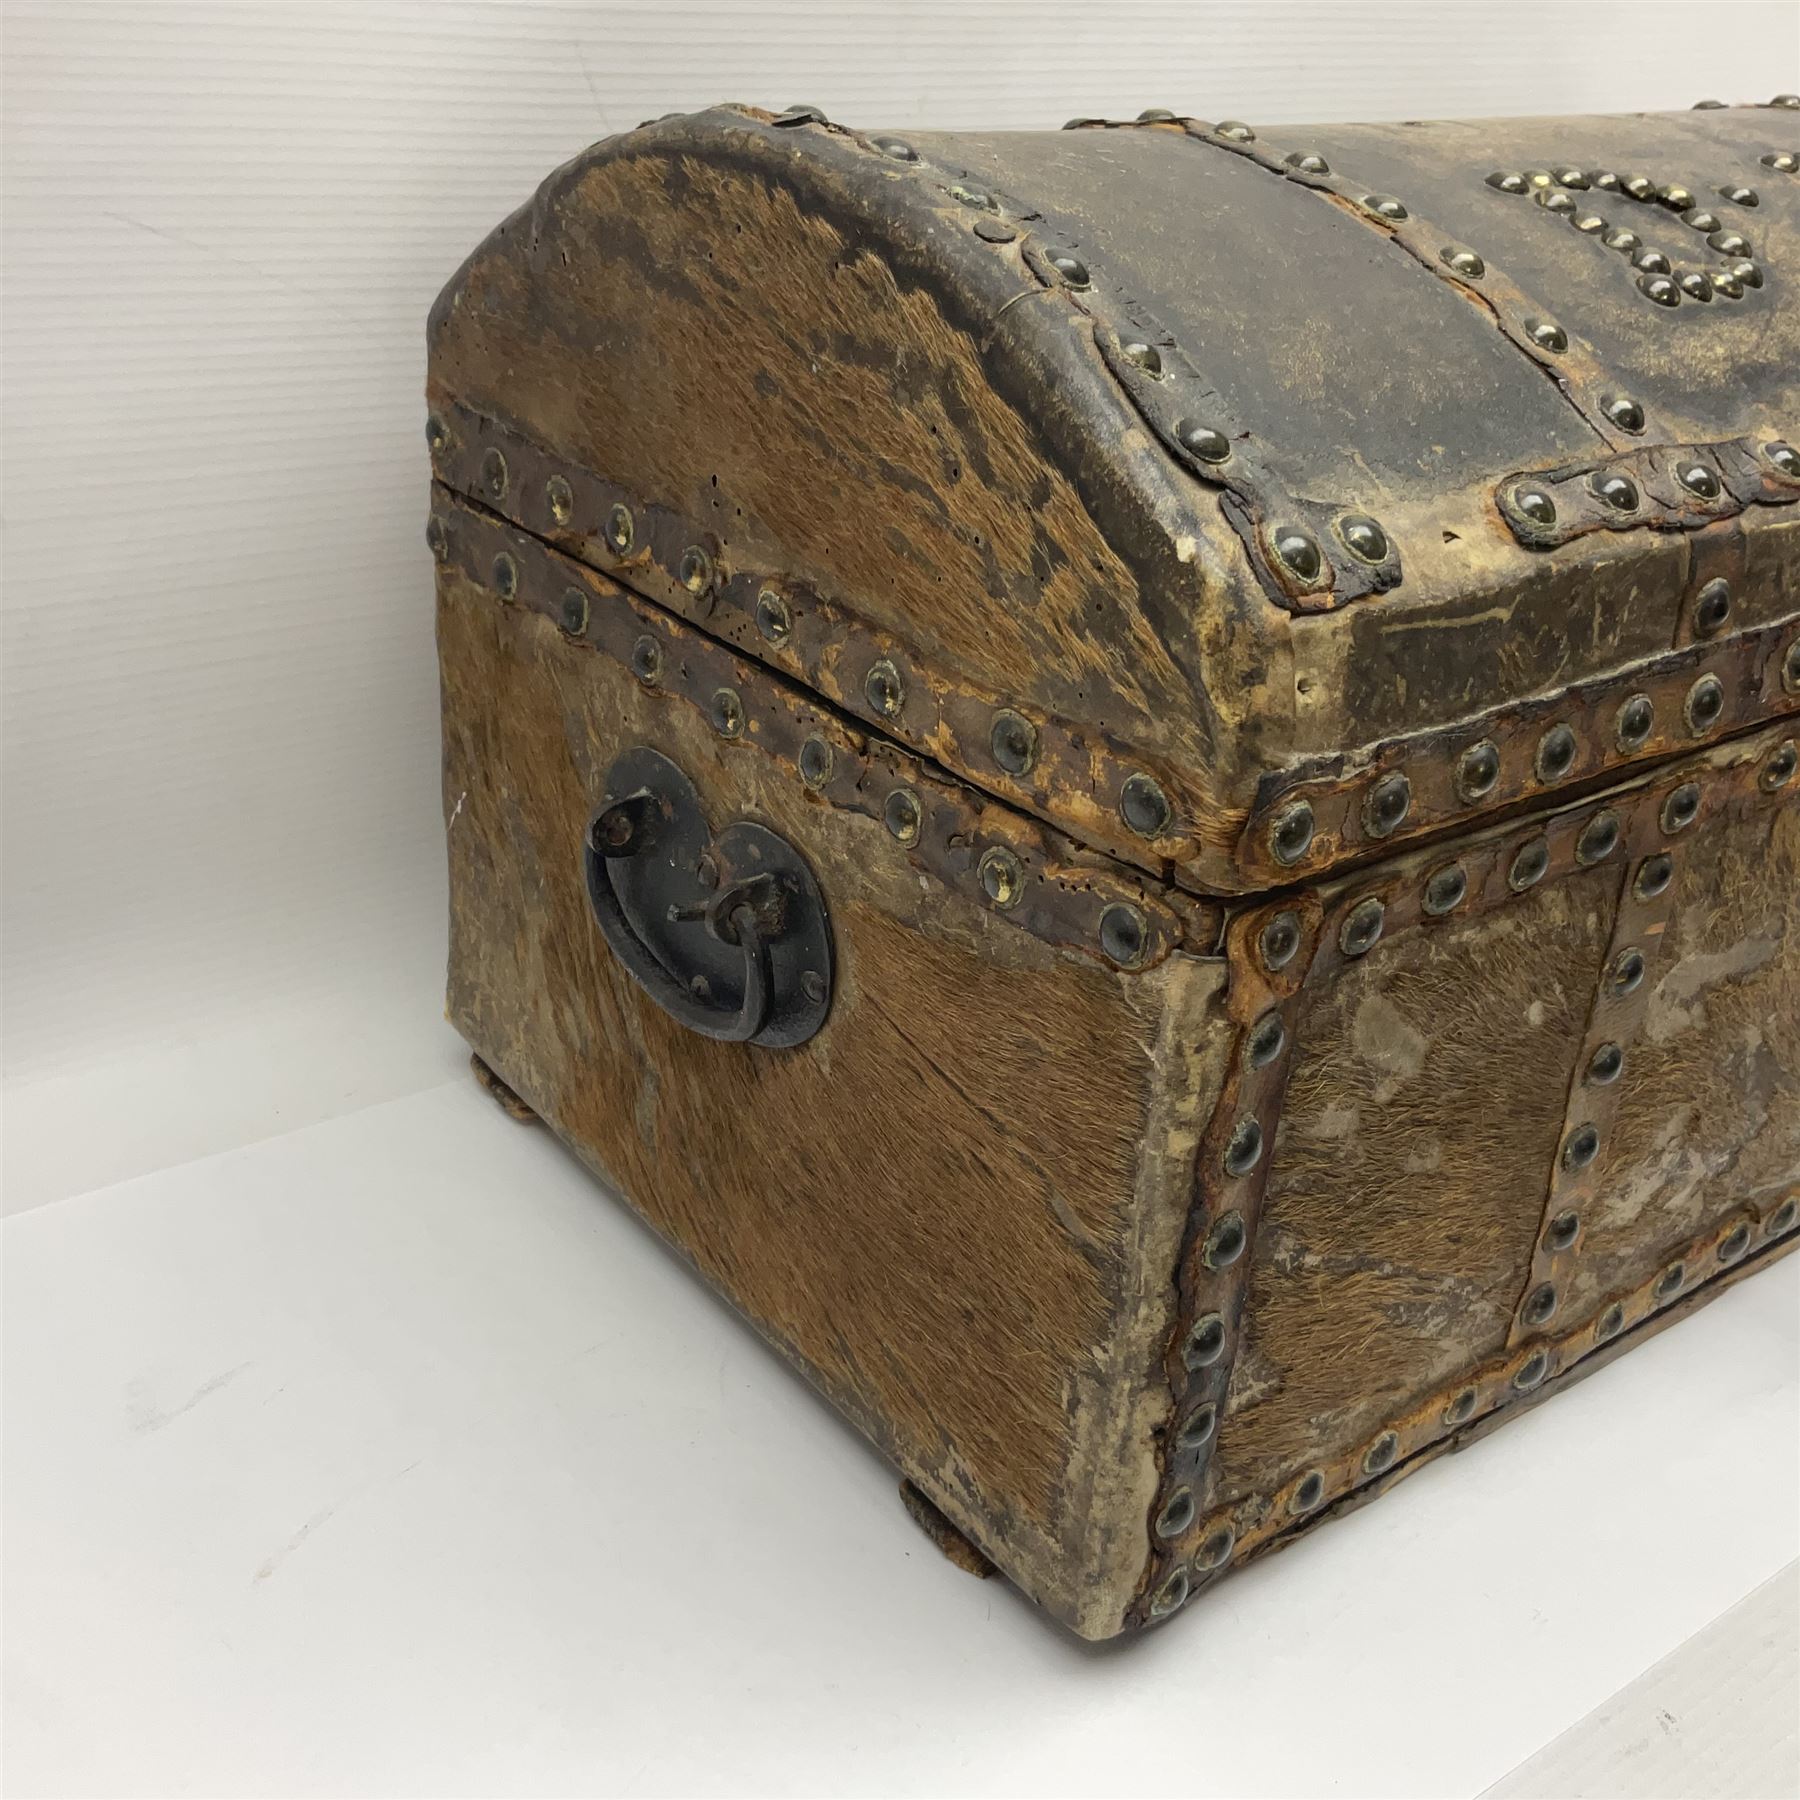 19th century pony skin dome top trunk with metal studded detail - Image 5 of 13